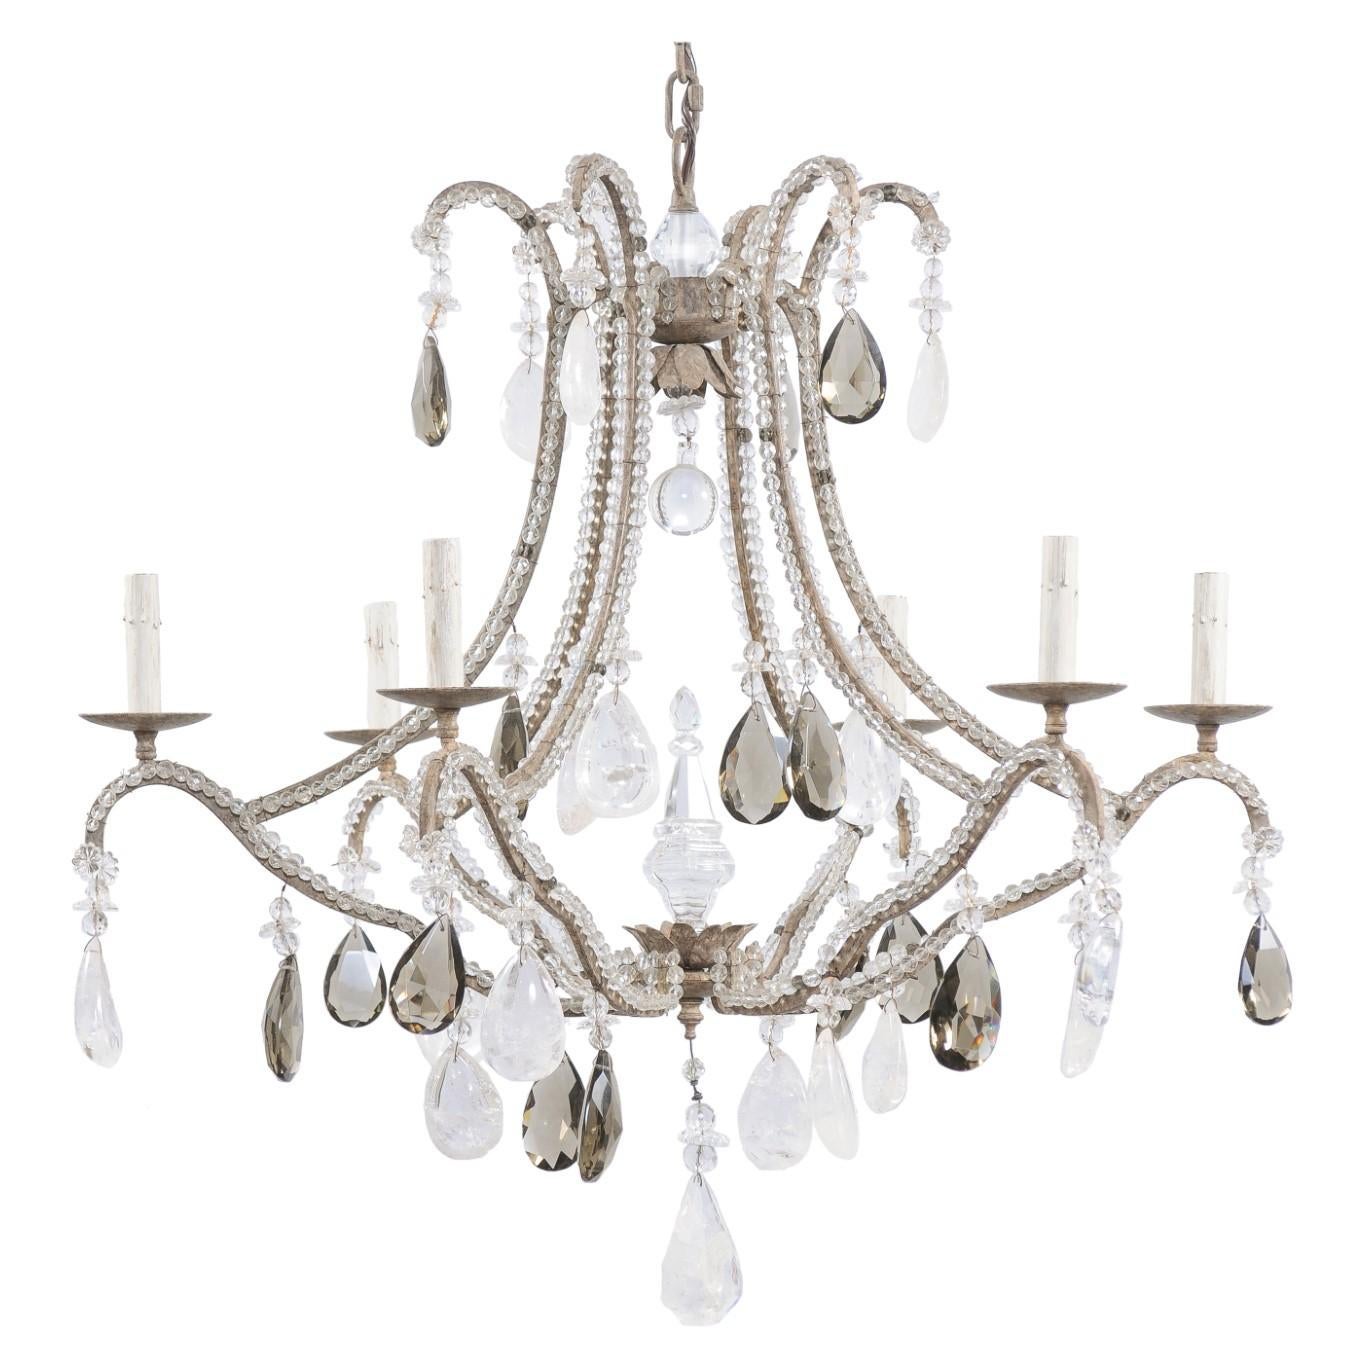 Vintage Six-Light Chandelier W/Waterfall Top, Adorn in Smoky & Rock Crystals